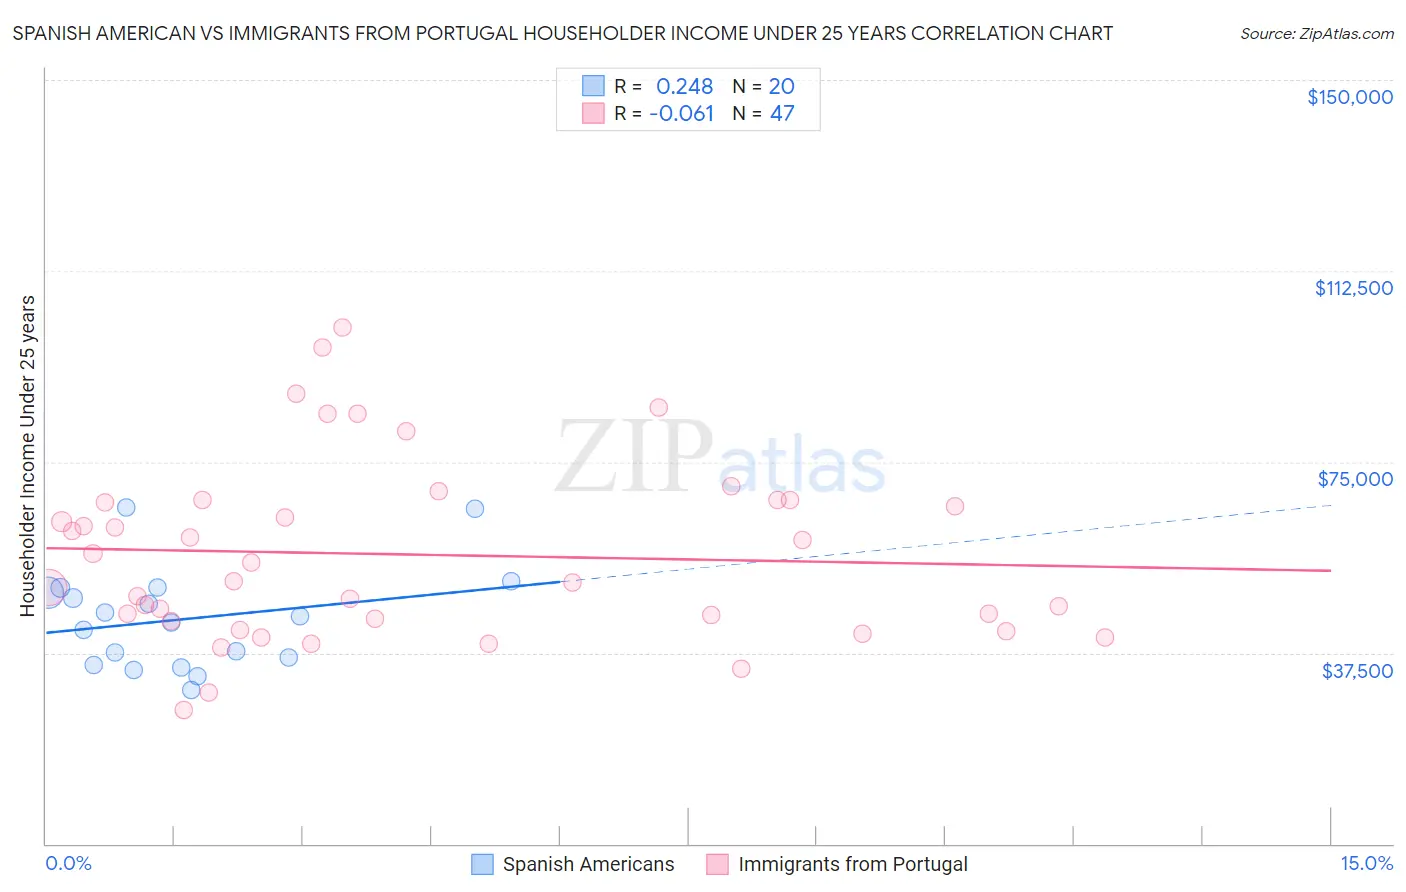 Spanish American vs Immigrants from Portugal Householder Income Under 25 years